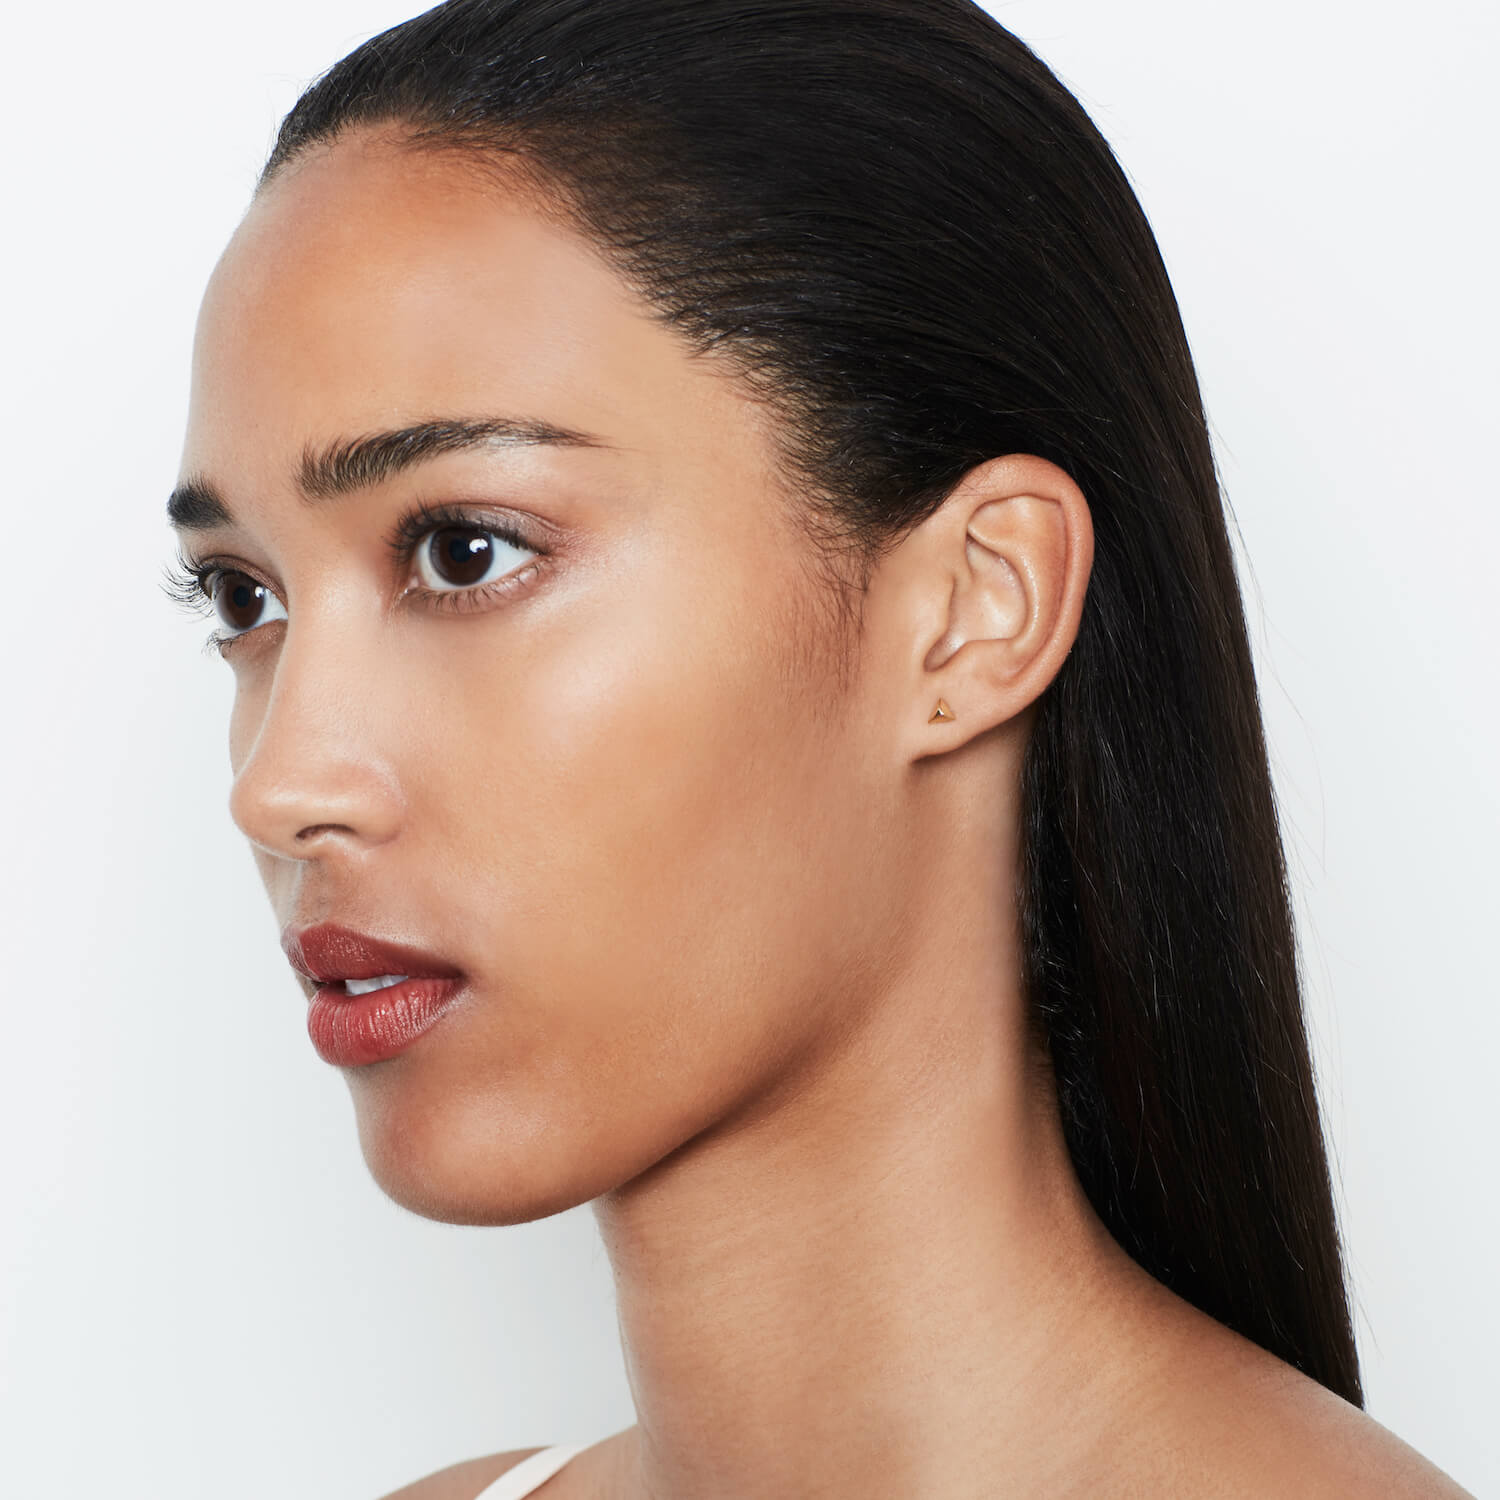 Model wearing small gold studs in the shape of a pyramid